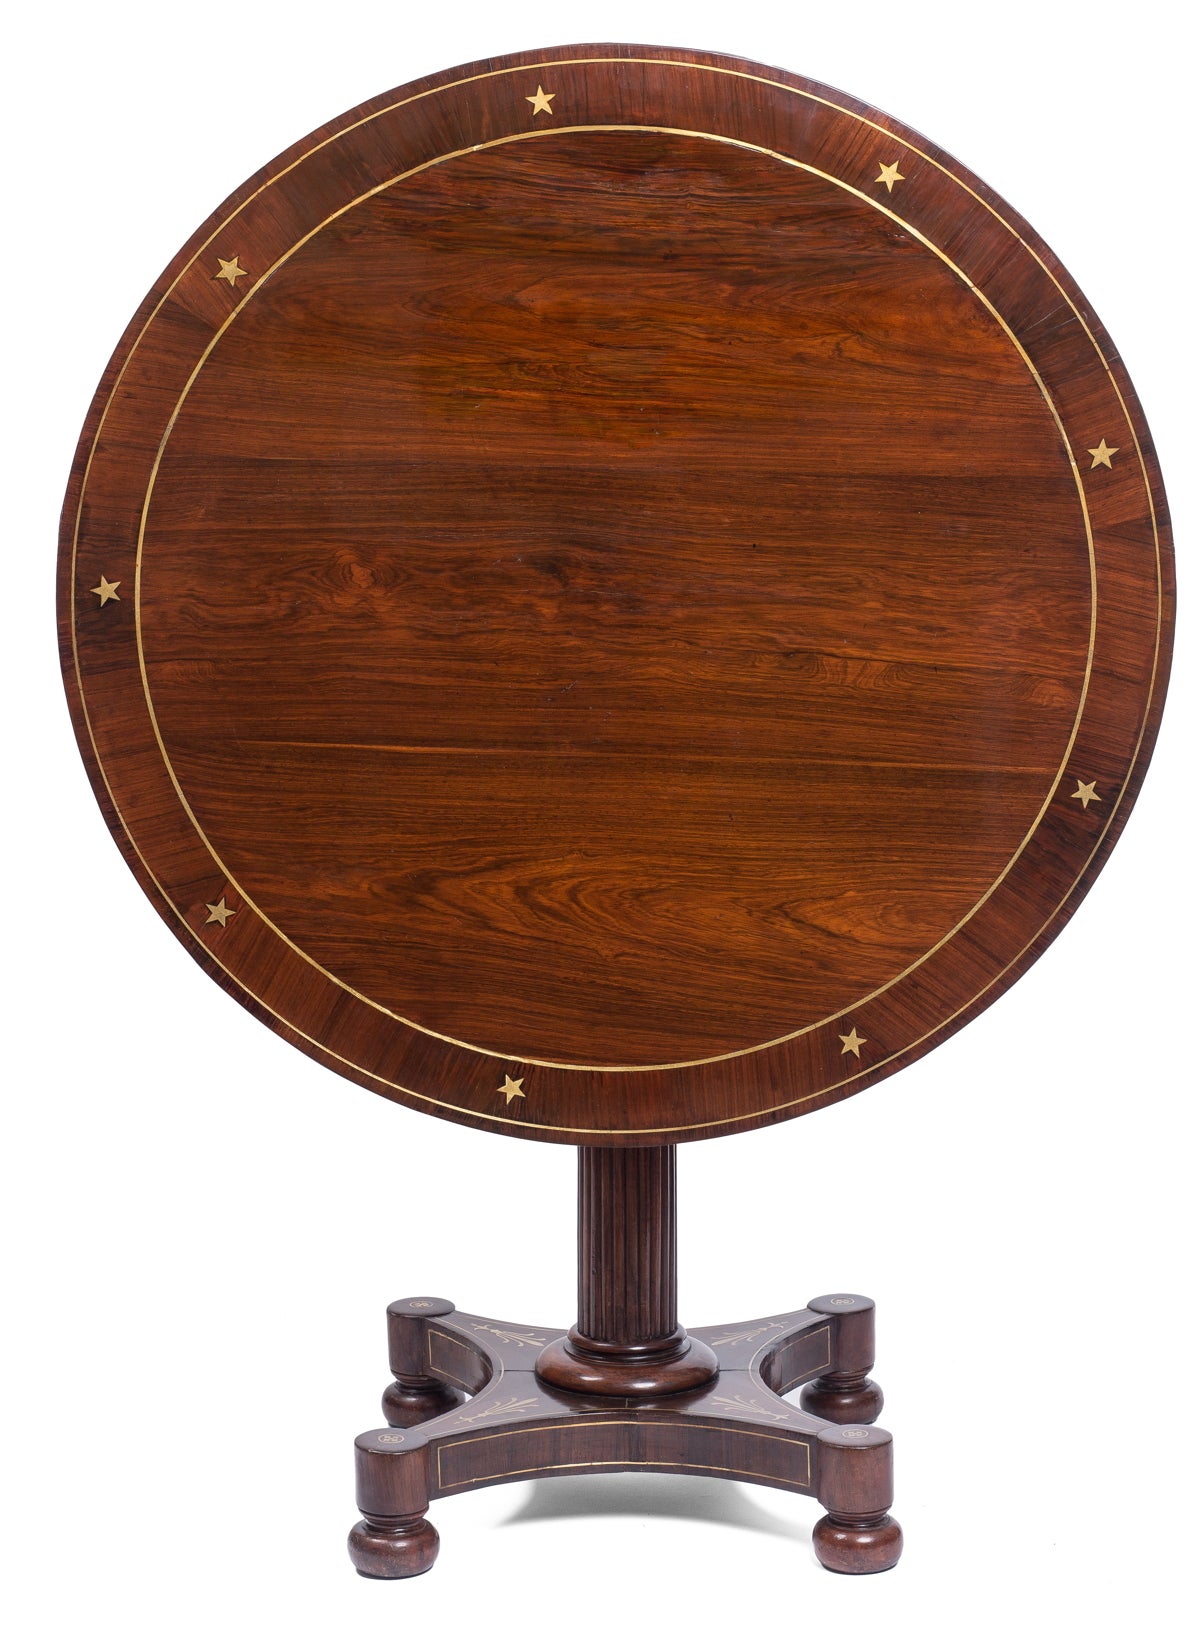 The circular tilt-top with inlaid brass stars above a fluted column raised on a brass inlaid quadripartite base, ending in bun feet.